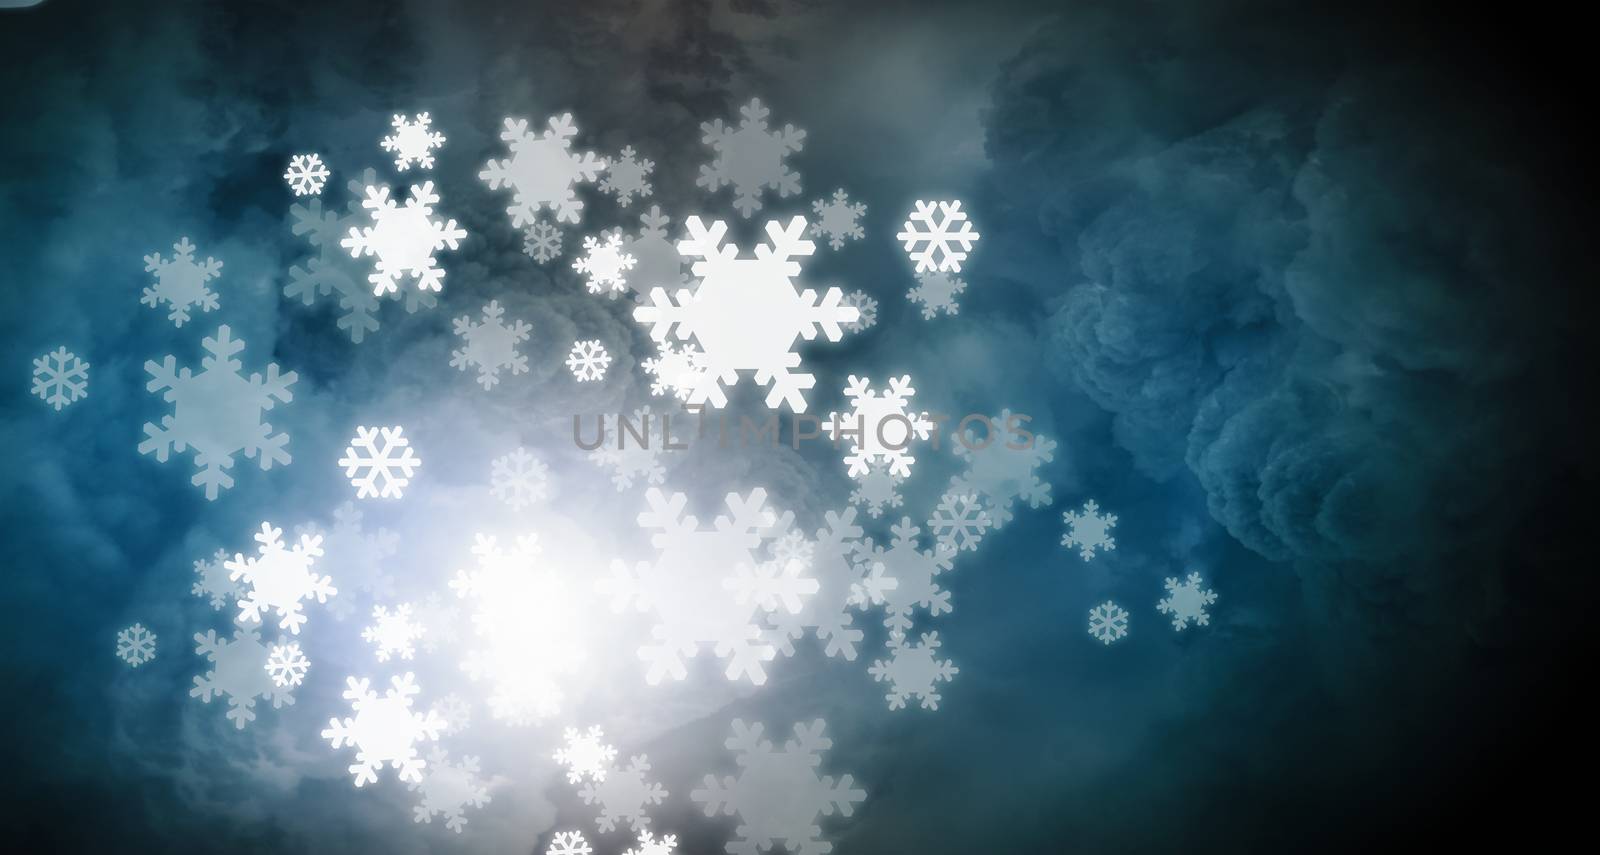 Background image with snowflakes. Happy New Year